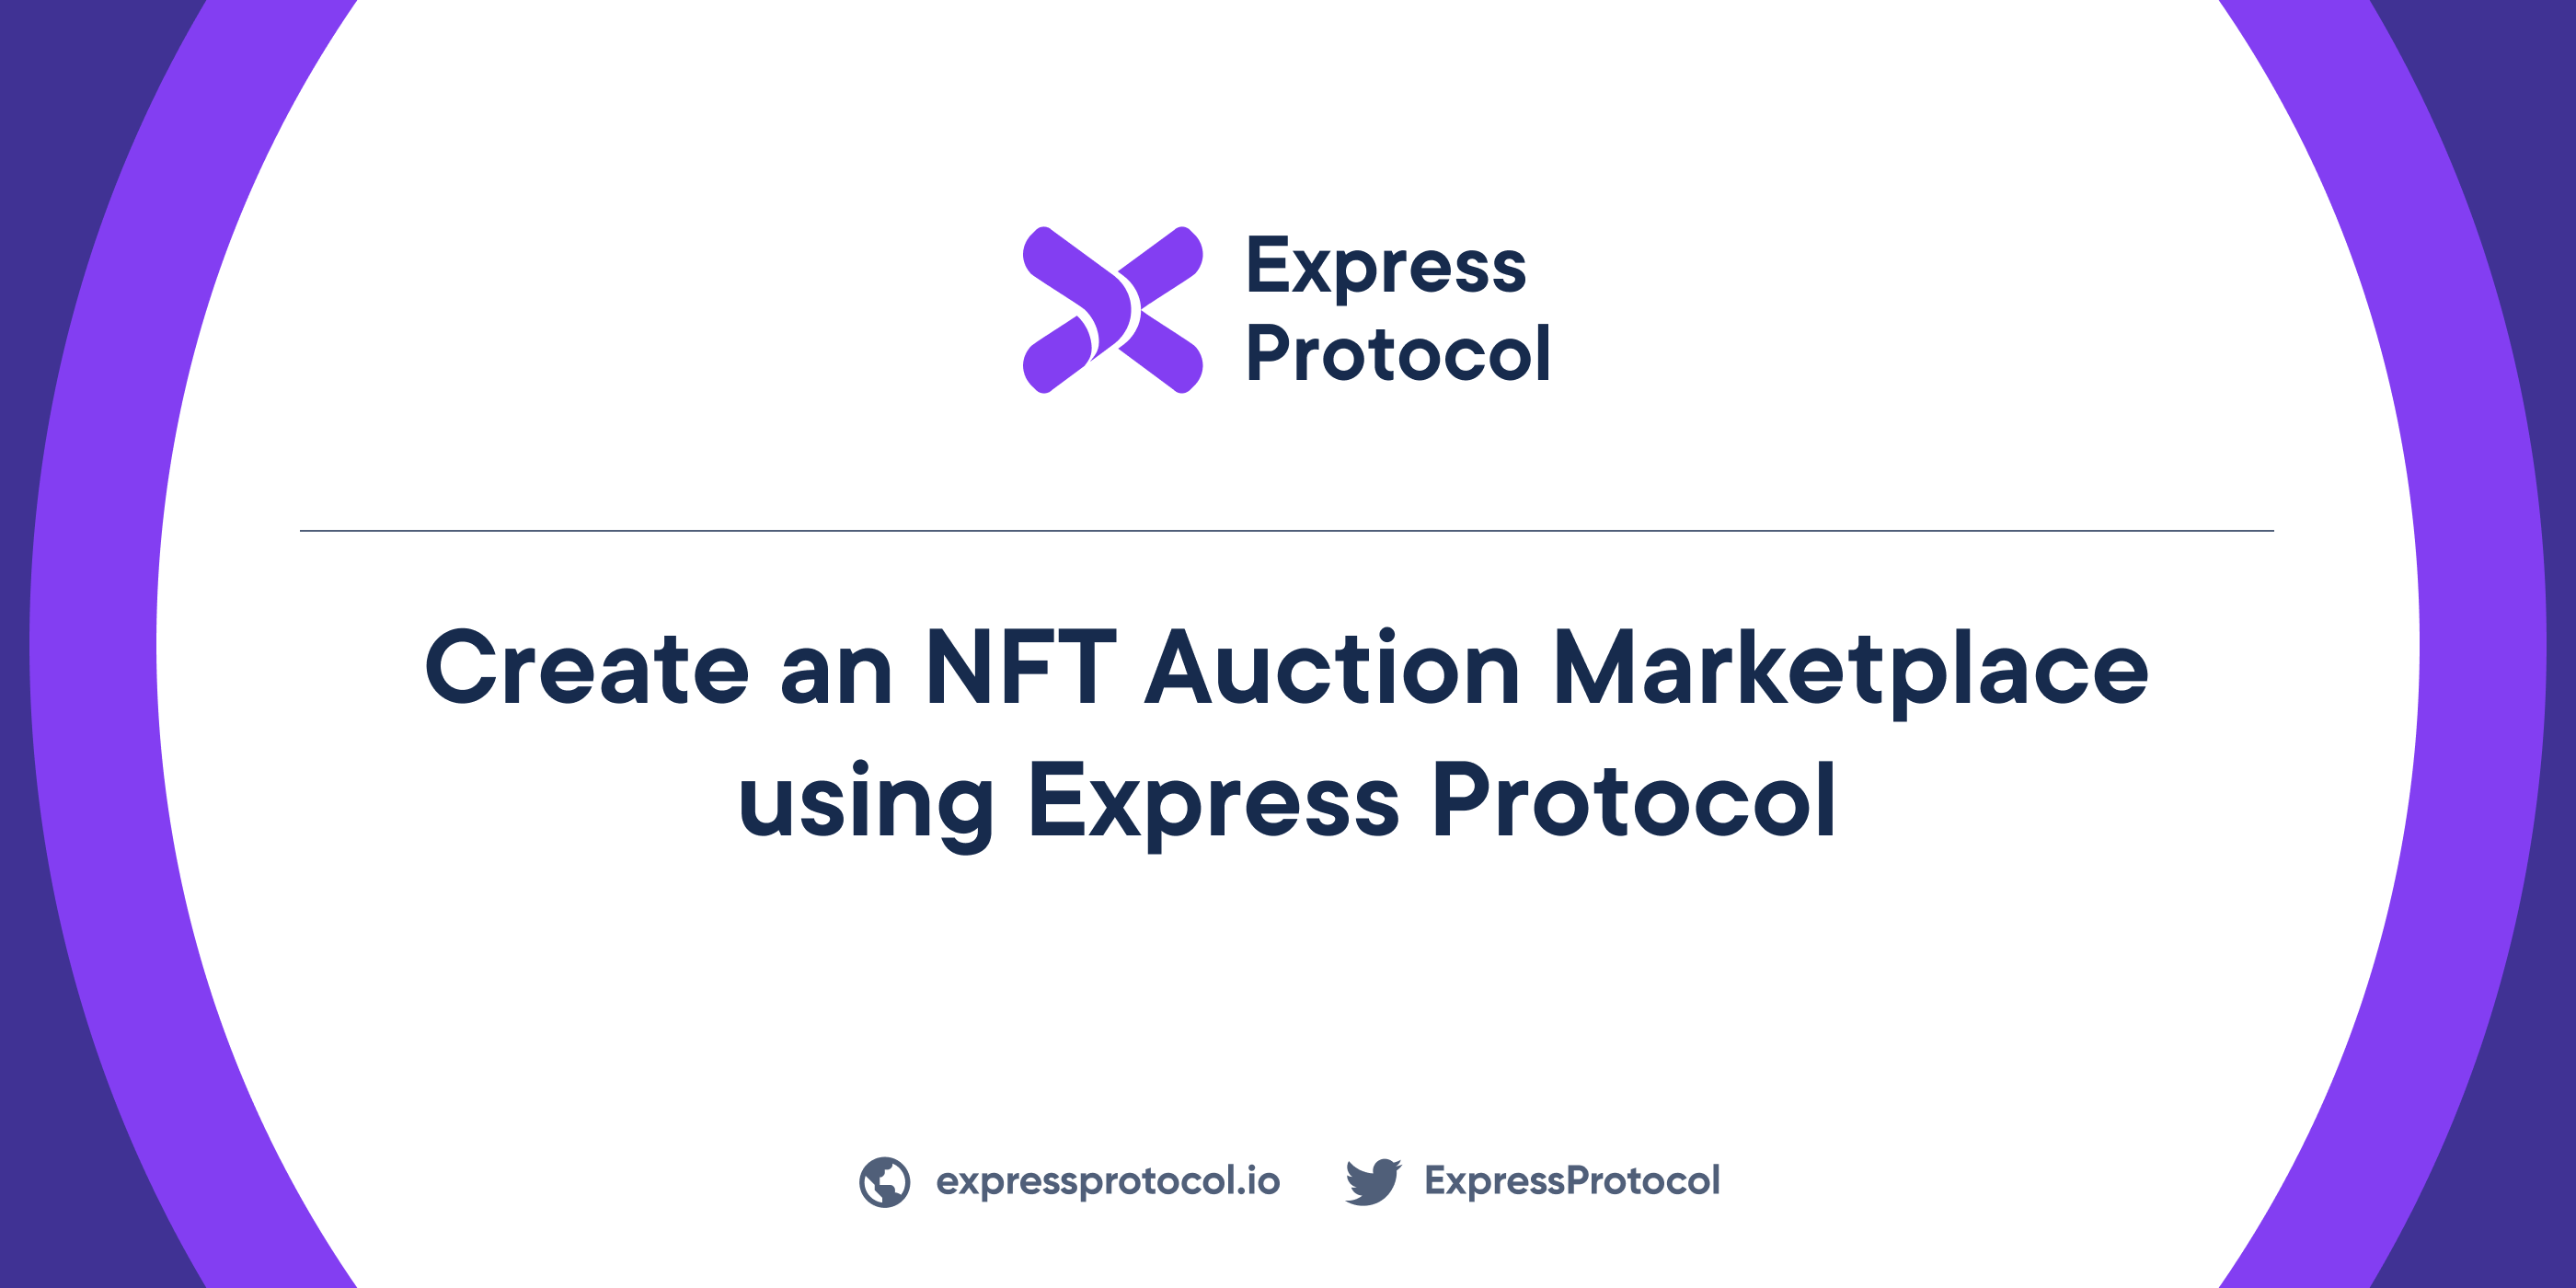 Create your NFT Auction Marketplace using